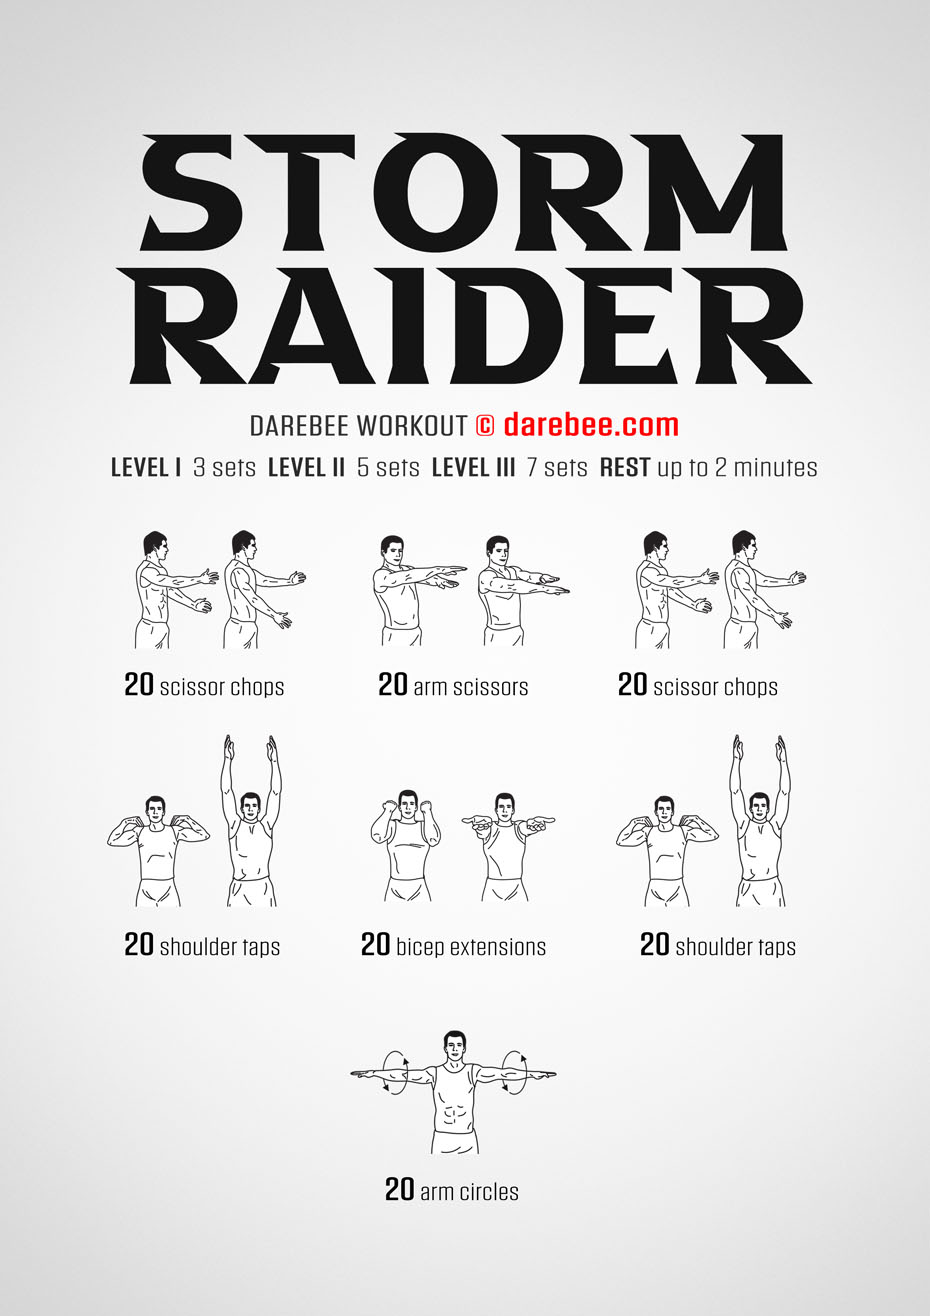 Storm Raider is a DAREBEE home fitness upper body strength workout that will not drain your batteries.